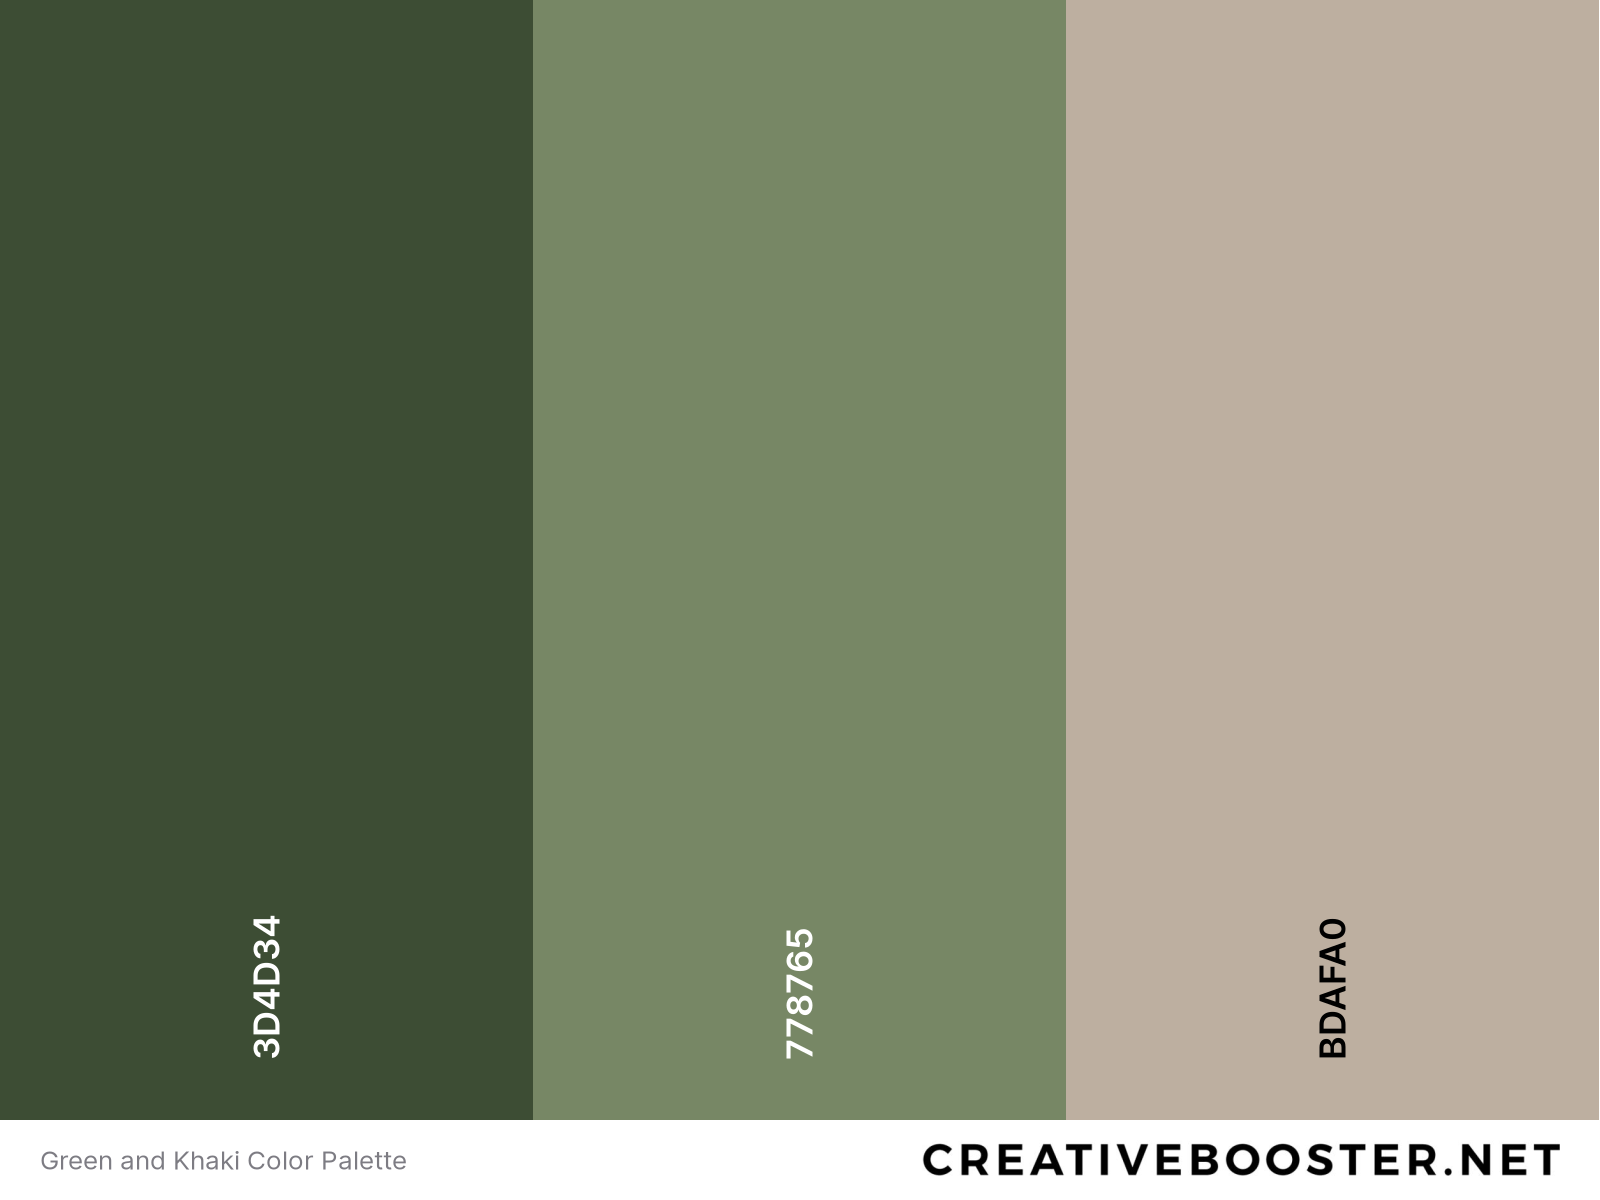 Green and Khaki Color Palette